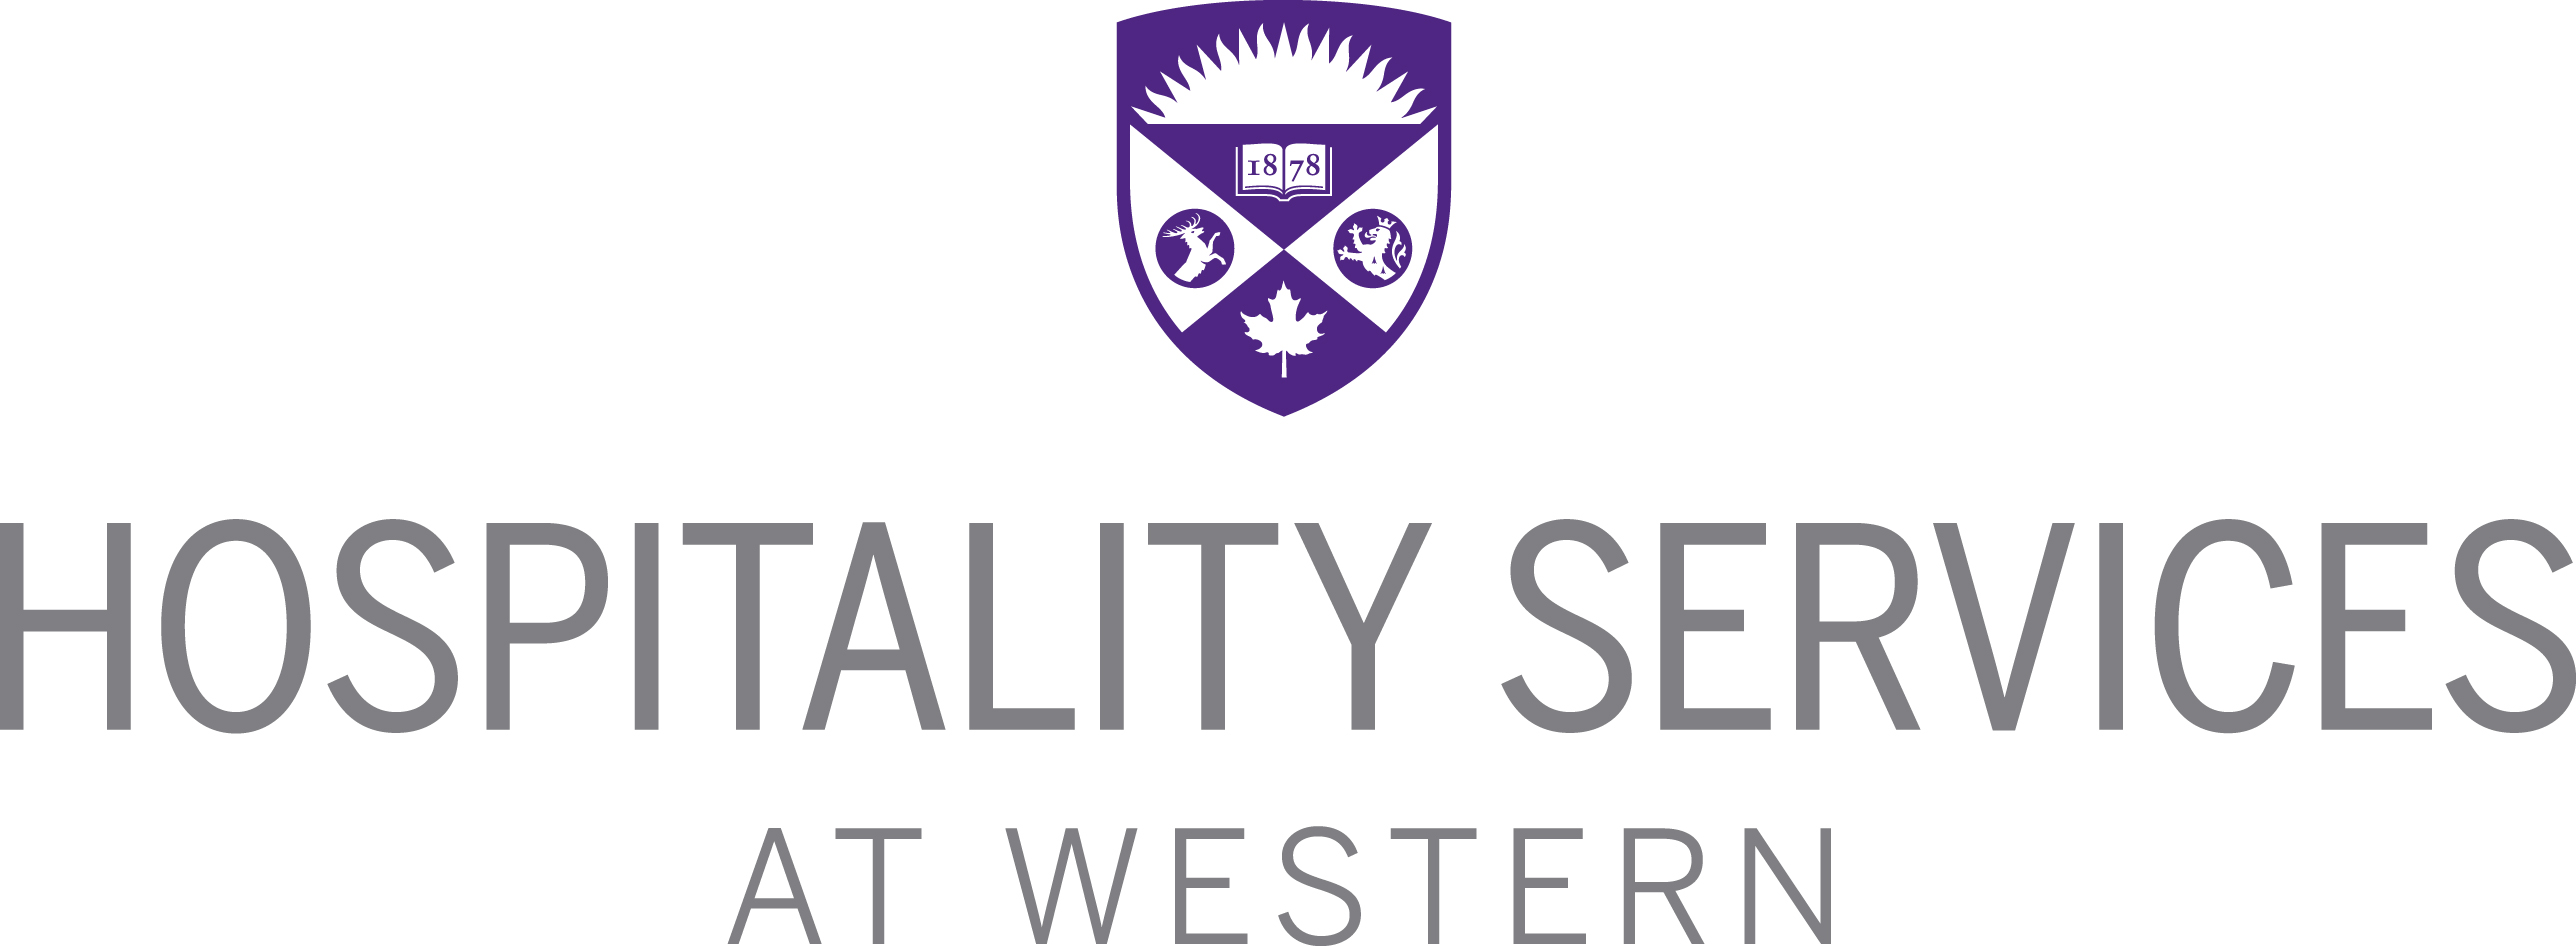 Hospitality Services at Western